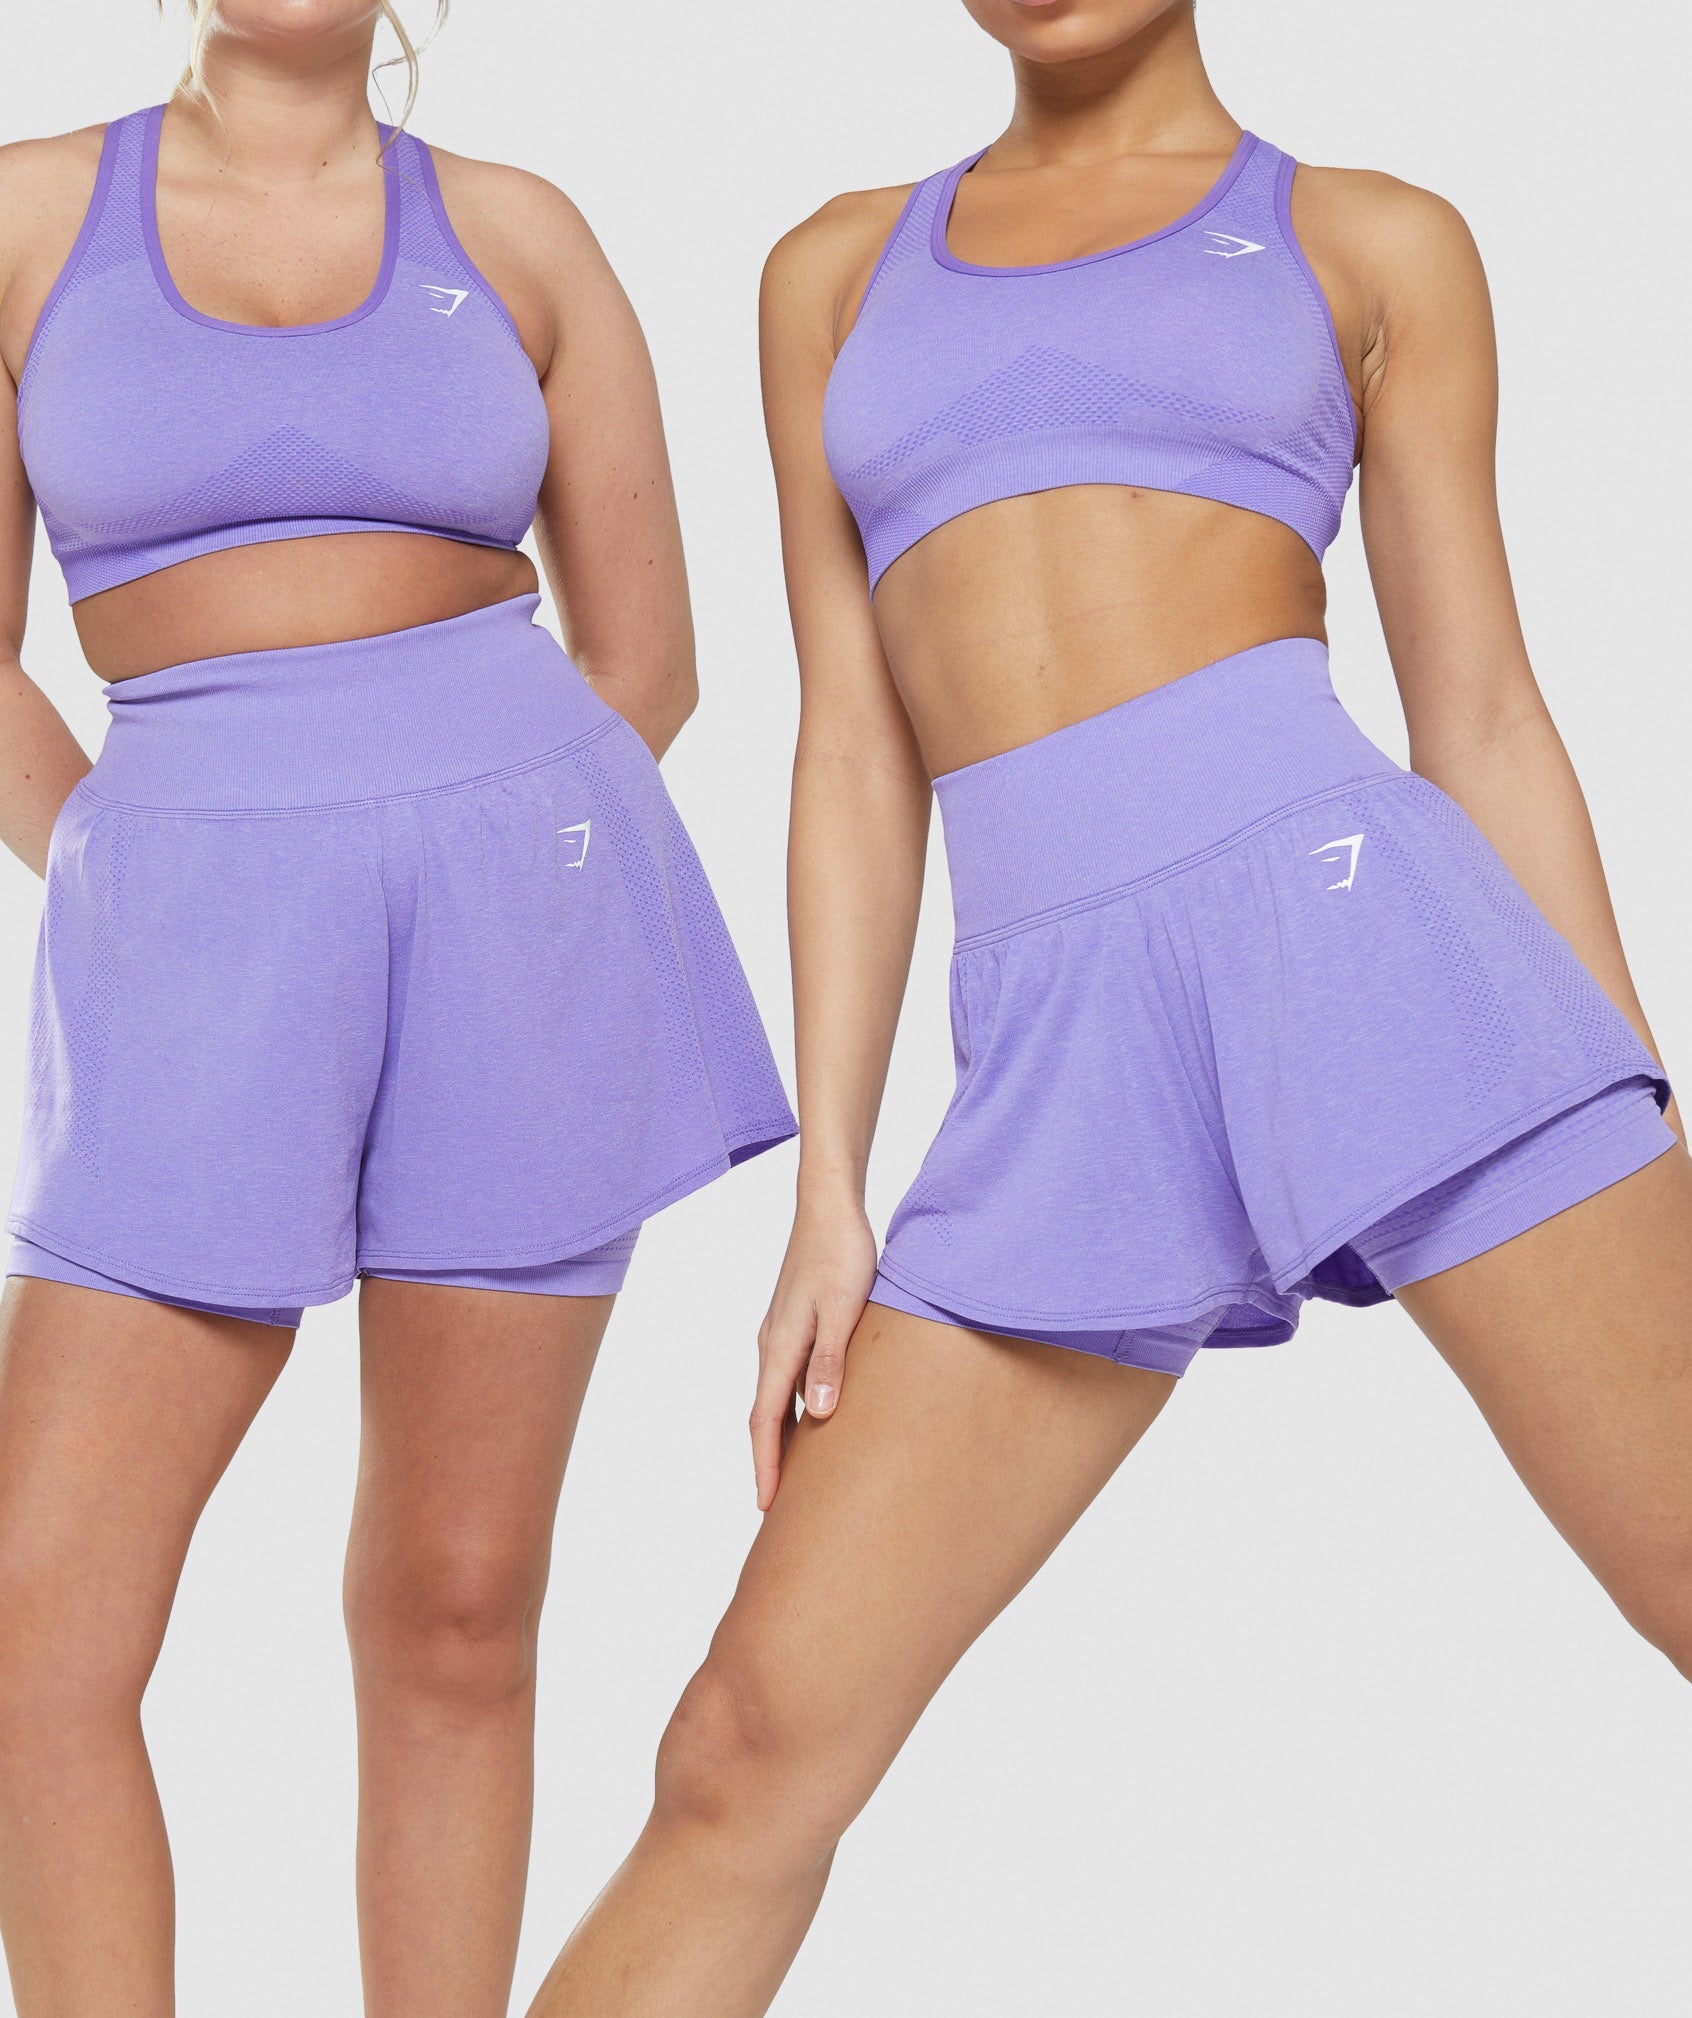 Vital Seamless 2.0 2-in-1 Shorts in Bright Purple Marl - view 5